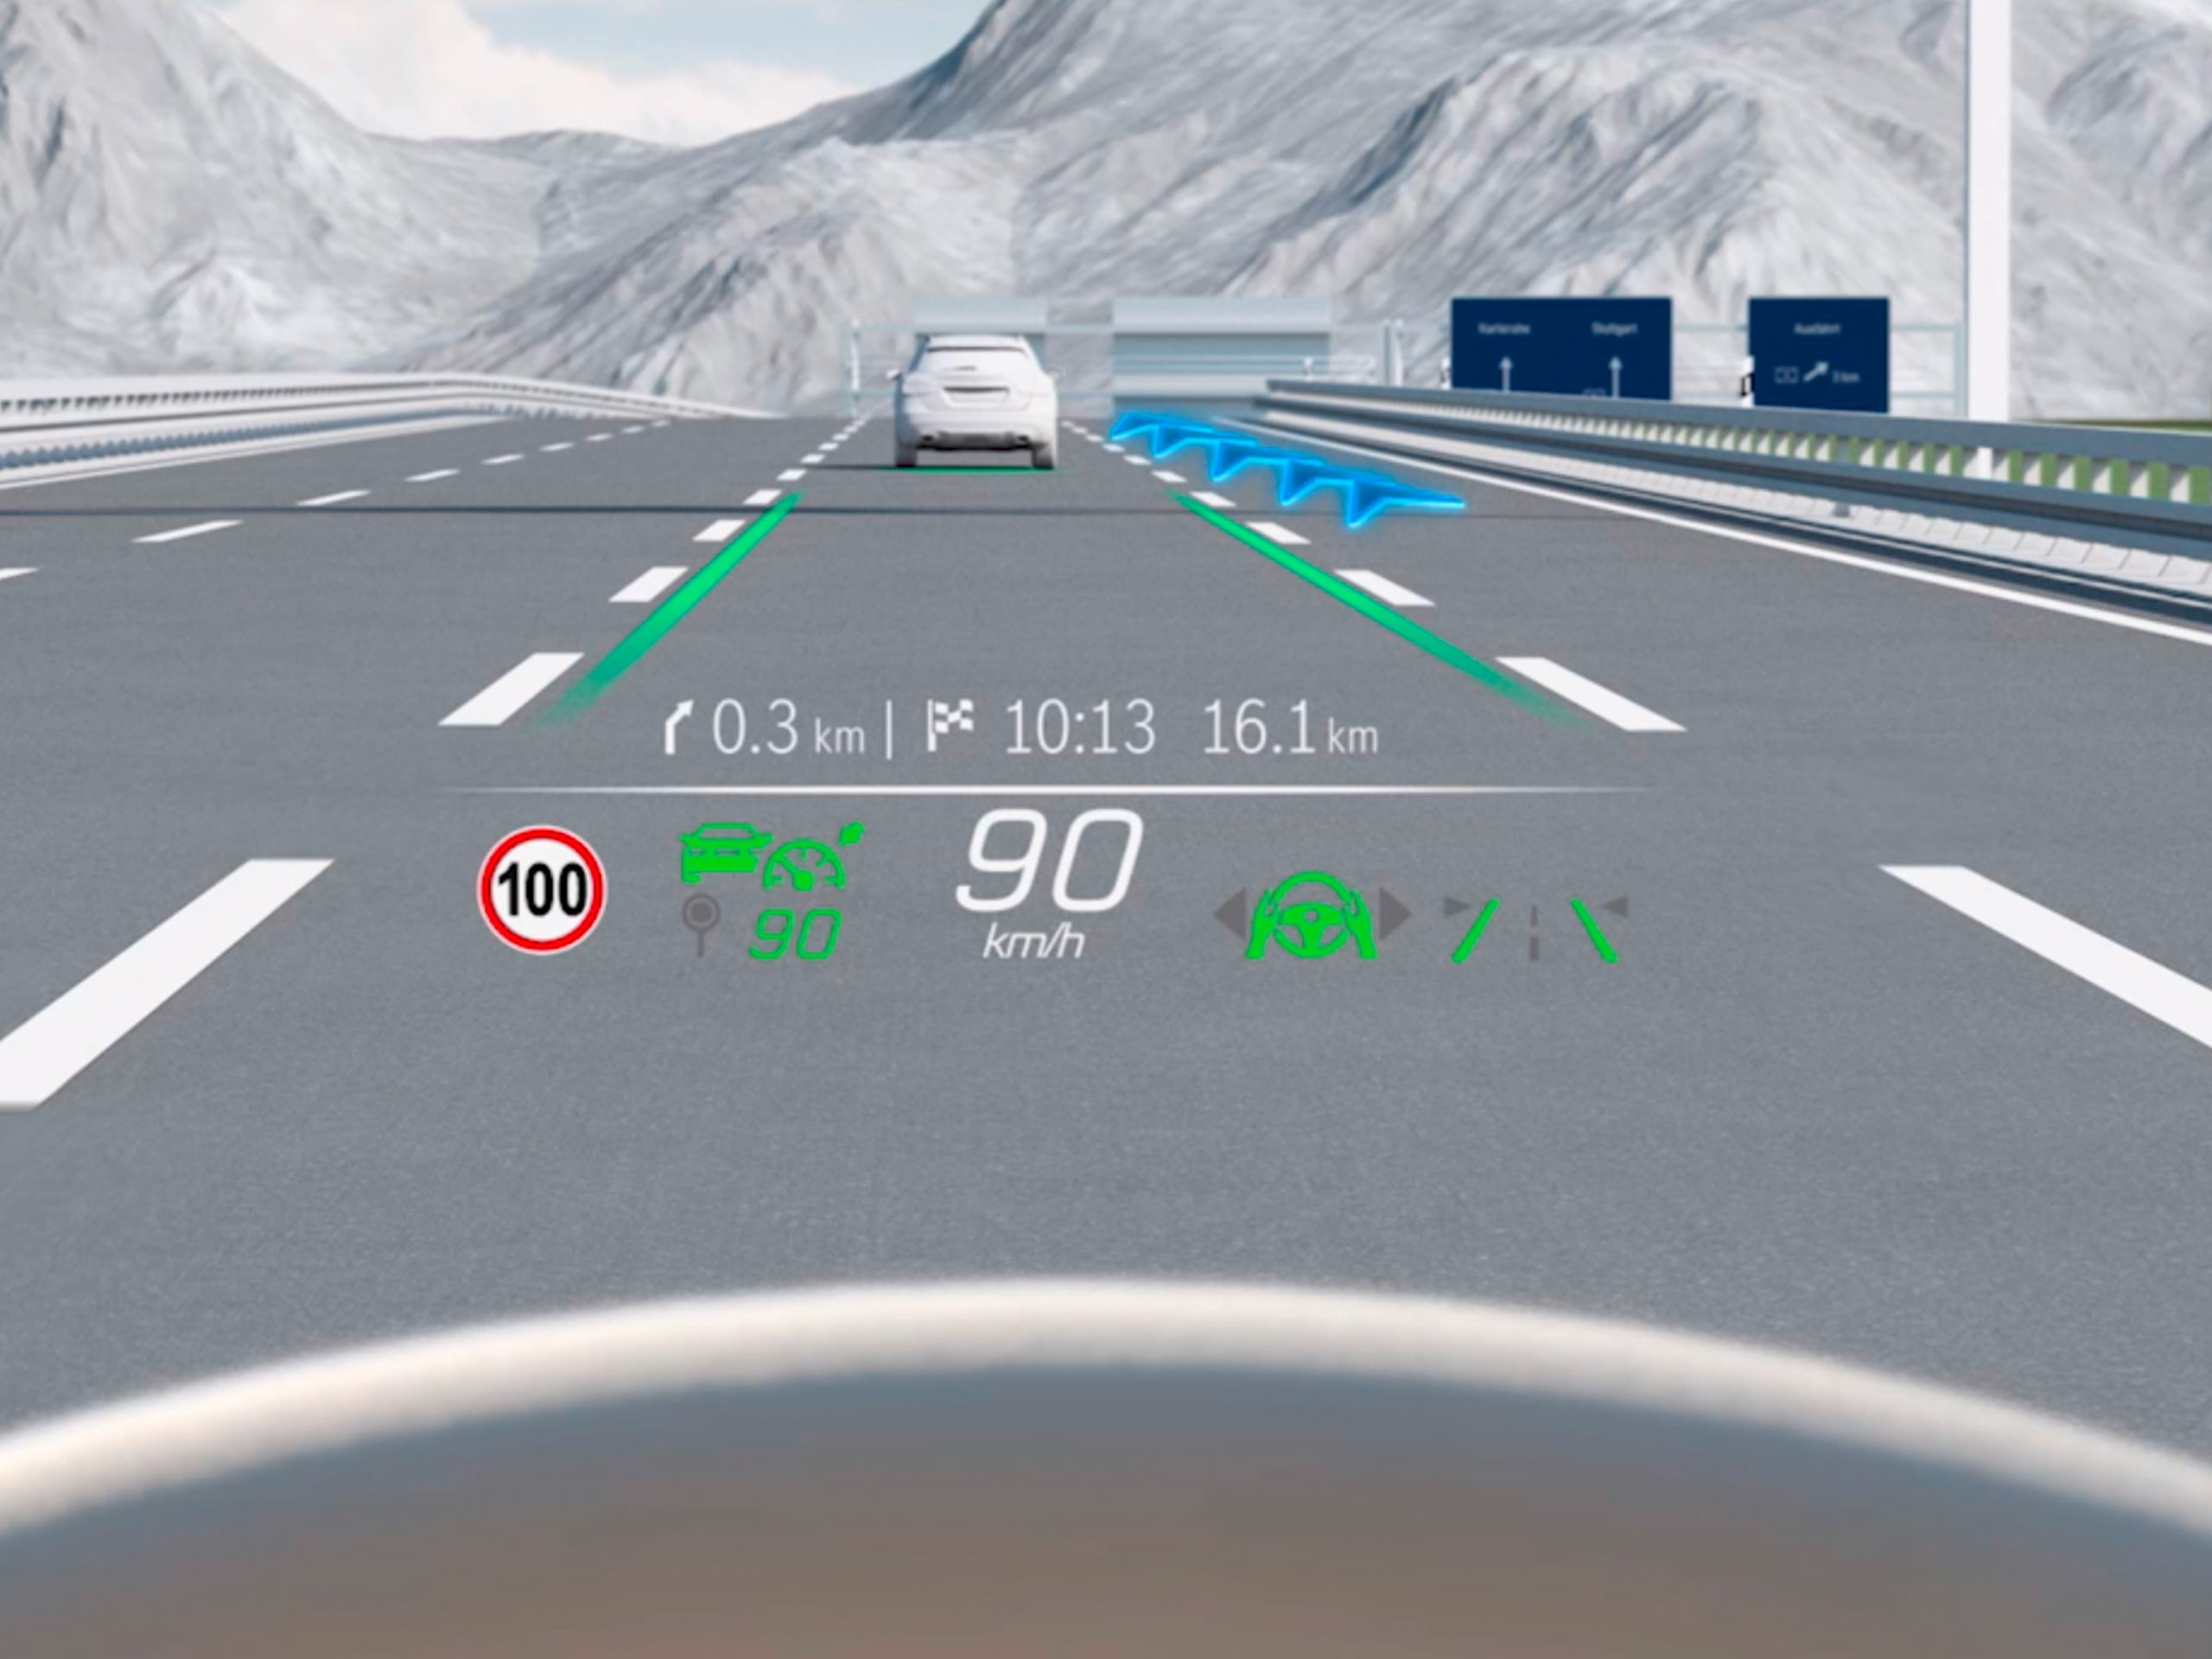 The video shows how the head-up display in the Mercedes-Benz C-Class Saloon works.